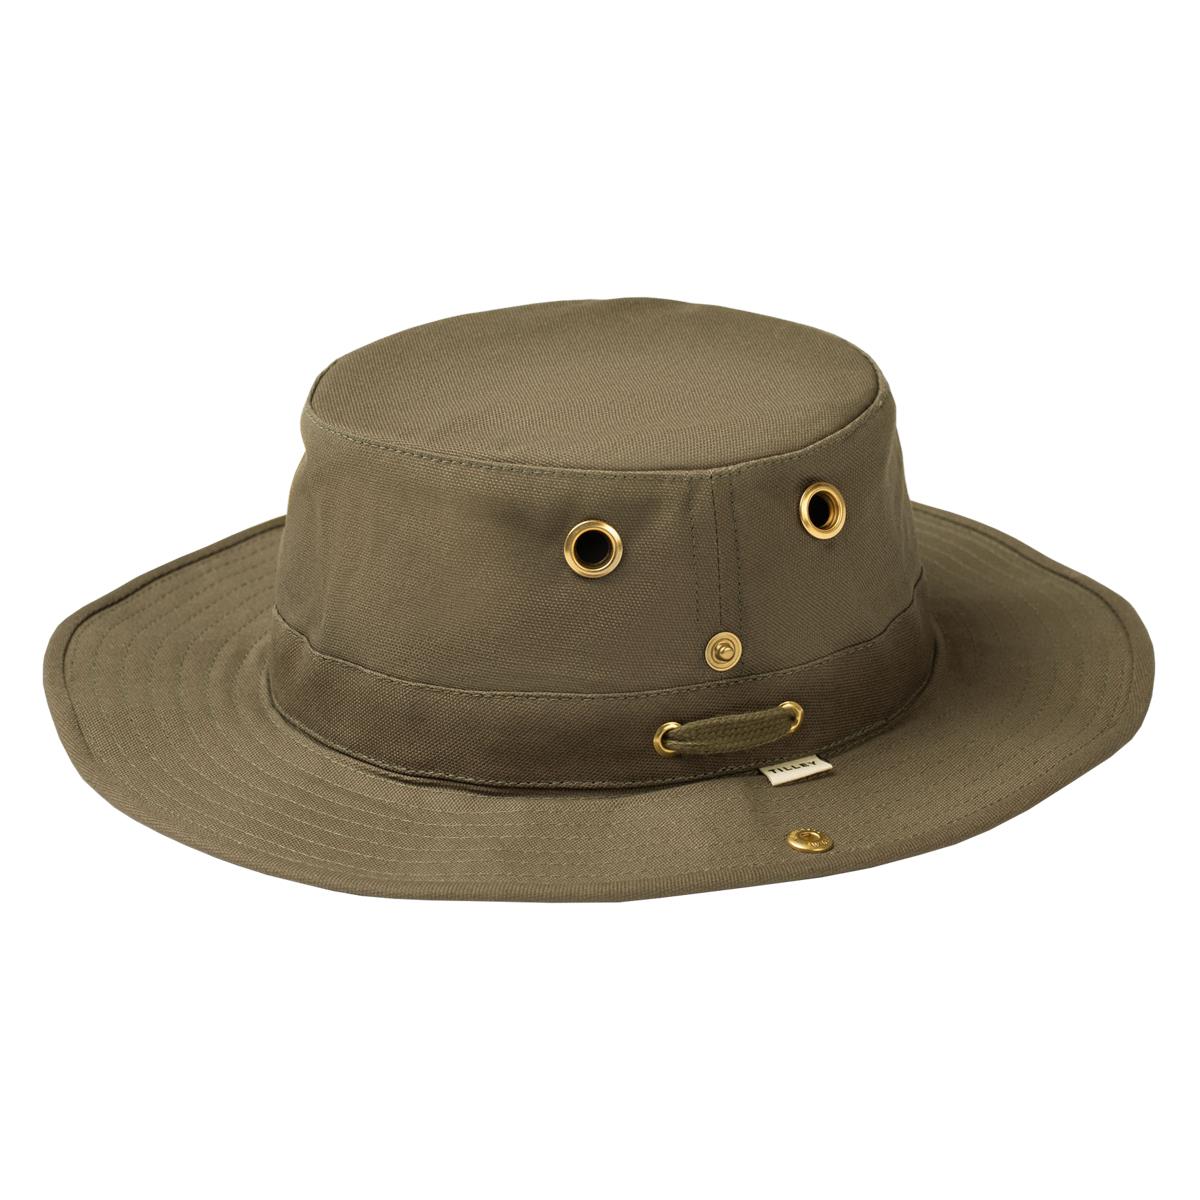 What is the fit of the Tilley hemp hat TH5 Medium Brim?